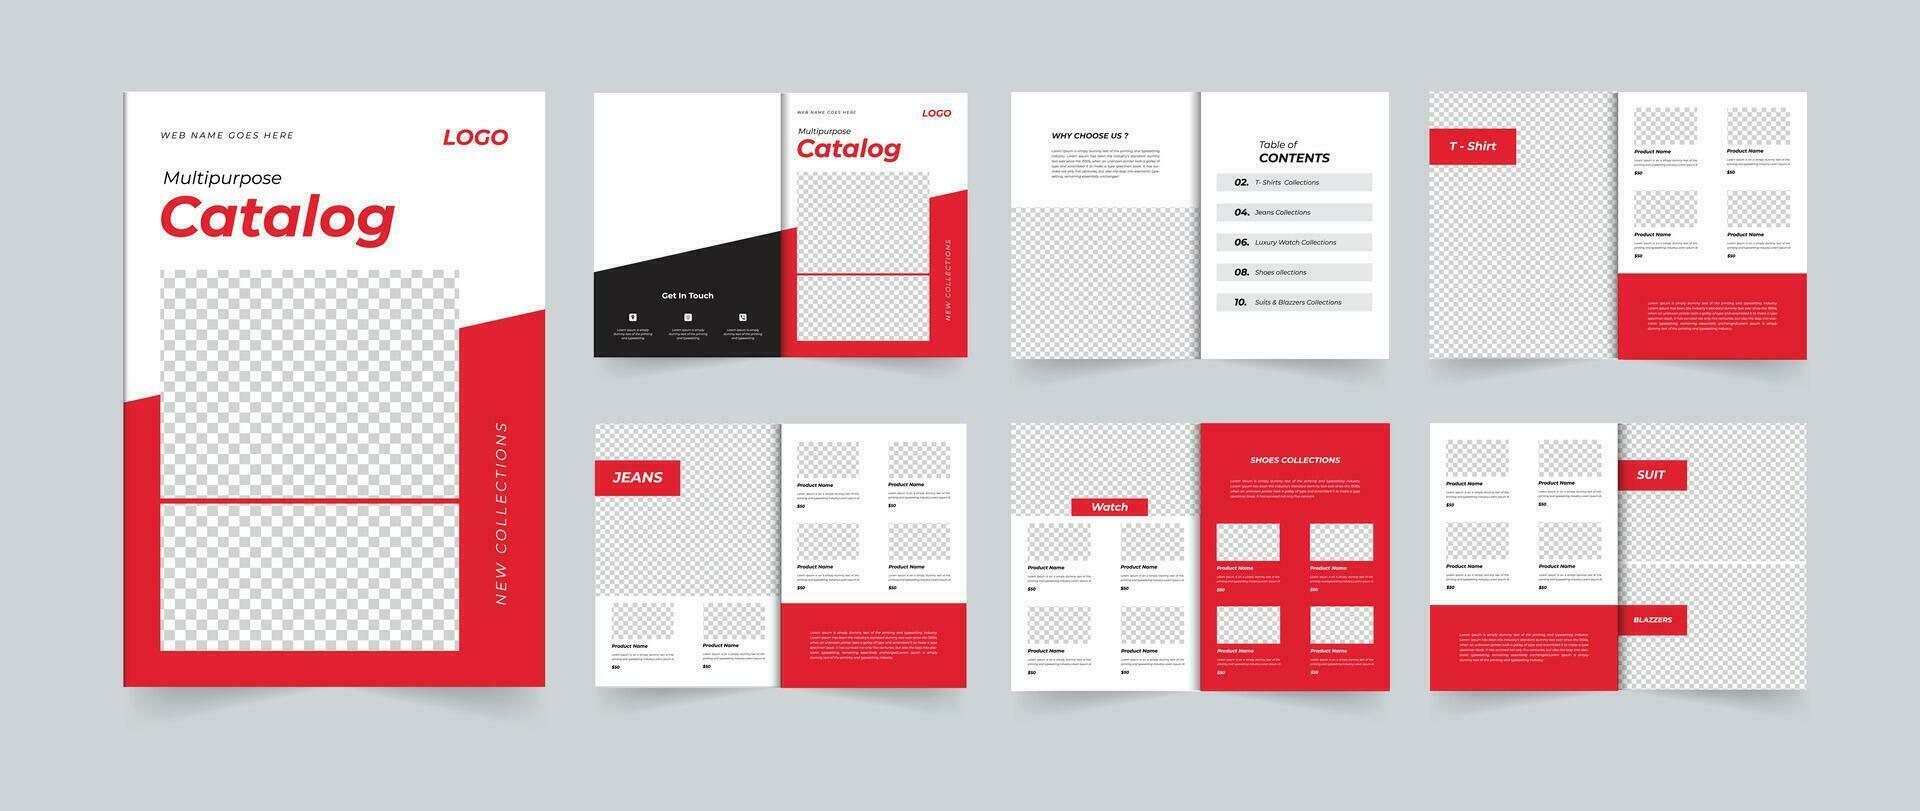 multipurpose Product catalogus ontwerp of mode Product catalogus vector